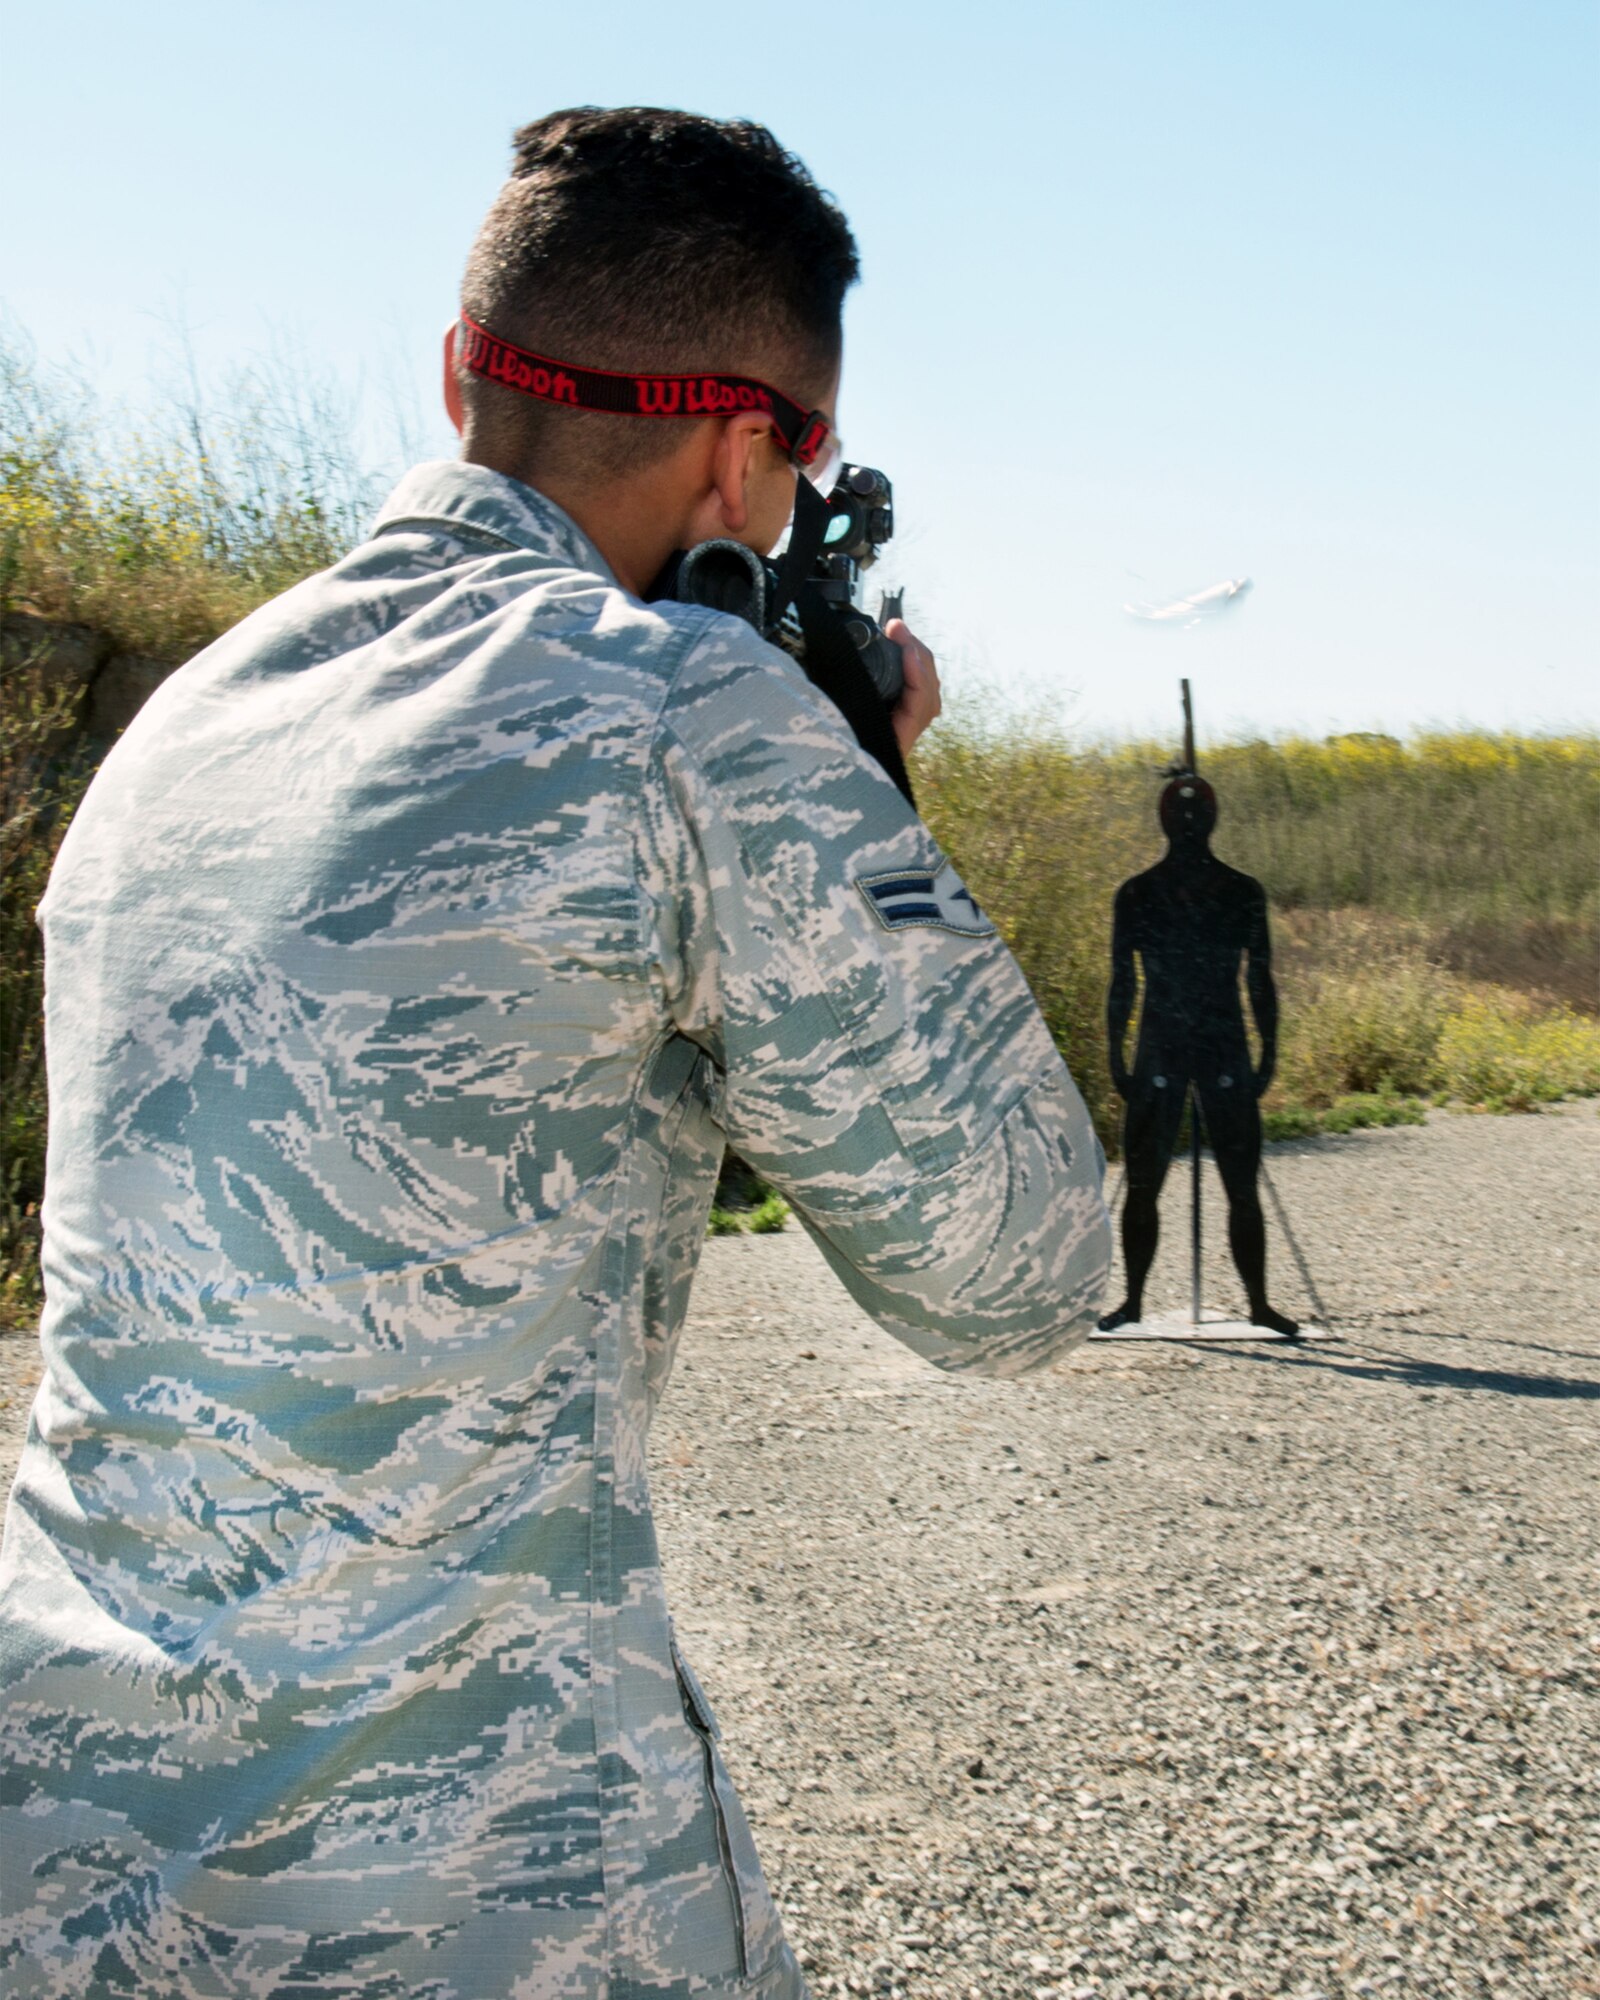 U.S. Air Force Airman 1st Class Joshua Adolf, 60th Security Forces Squadron, Travis Air Force Base, Calif., competes in a shooting competition May 18, 2017. The competition was one of several events sponsored by the squadron in honor of Police Week. (U.S. Air Force photo by Louis Briscese)